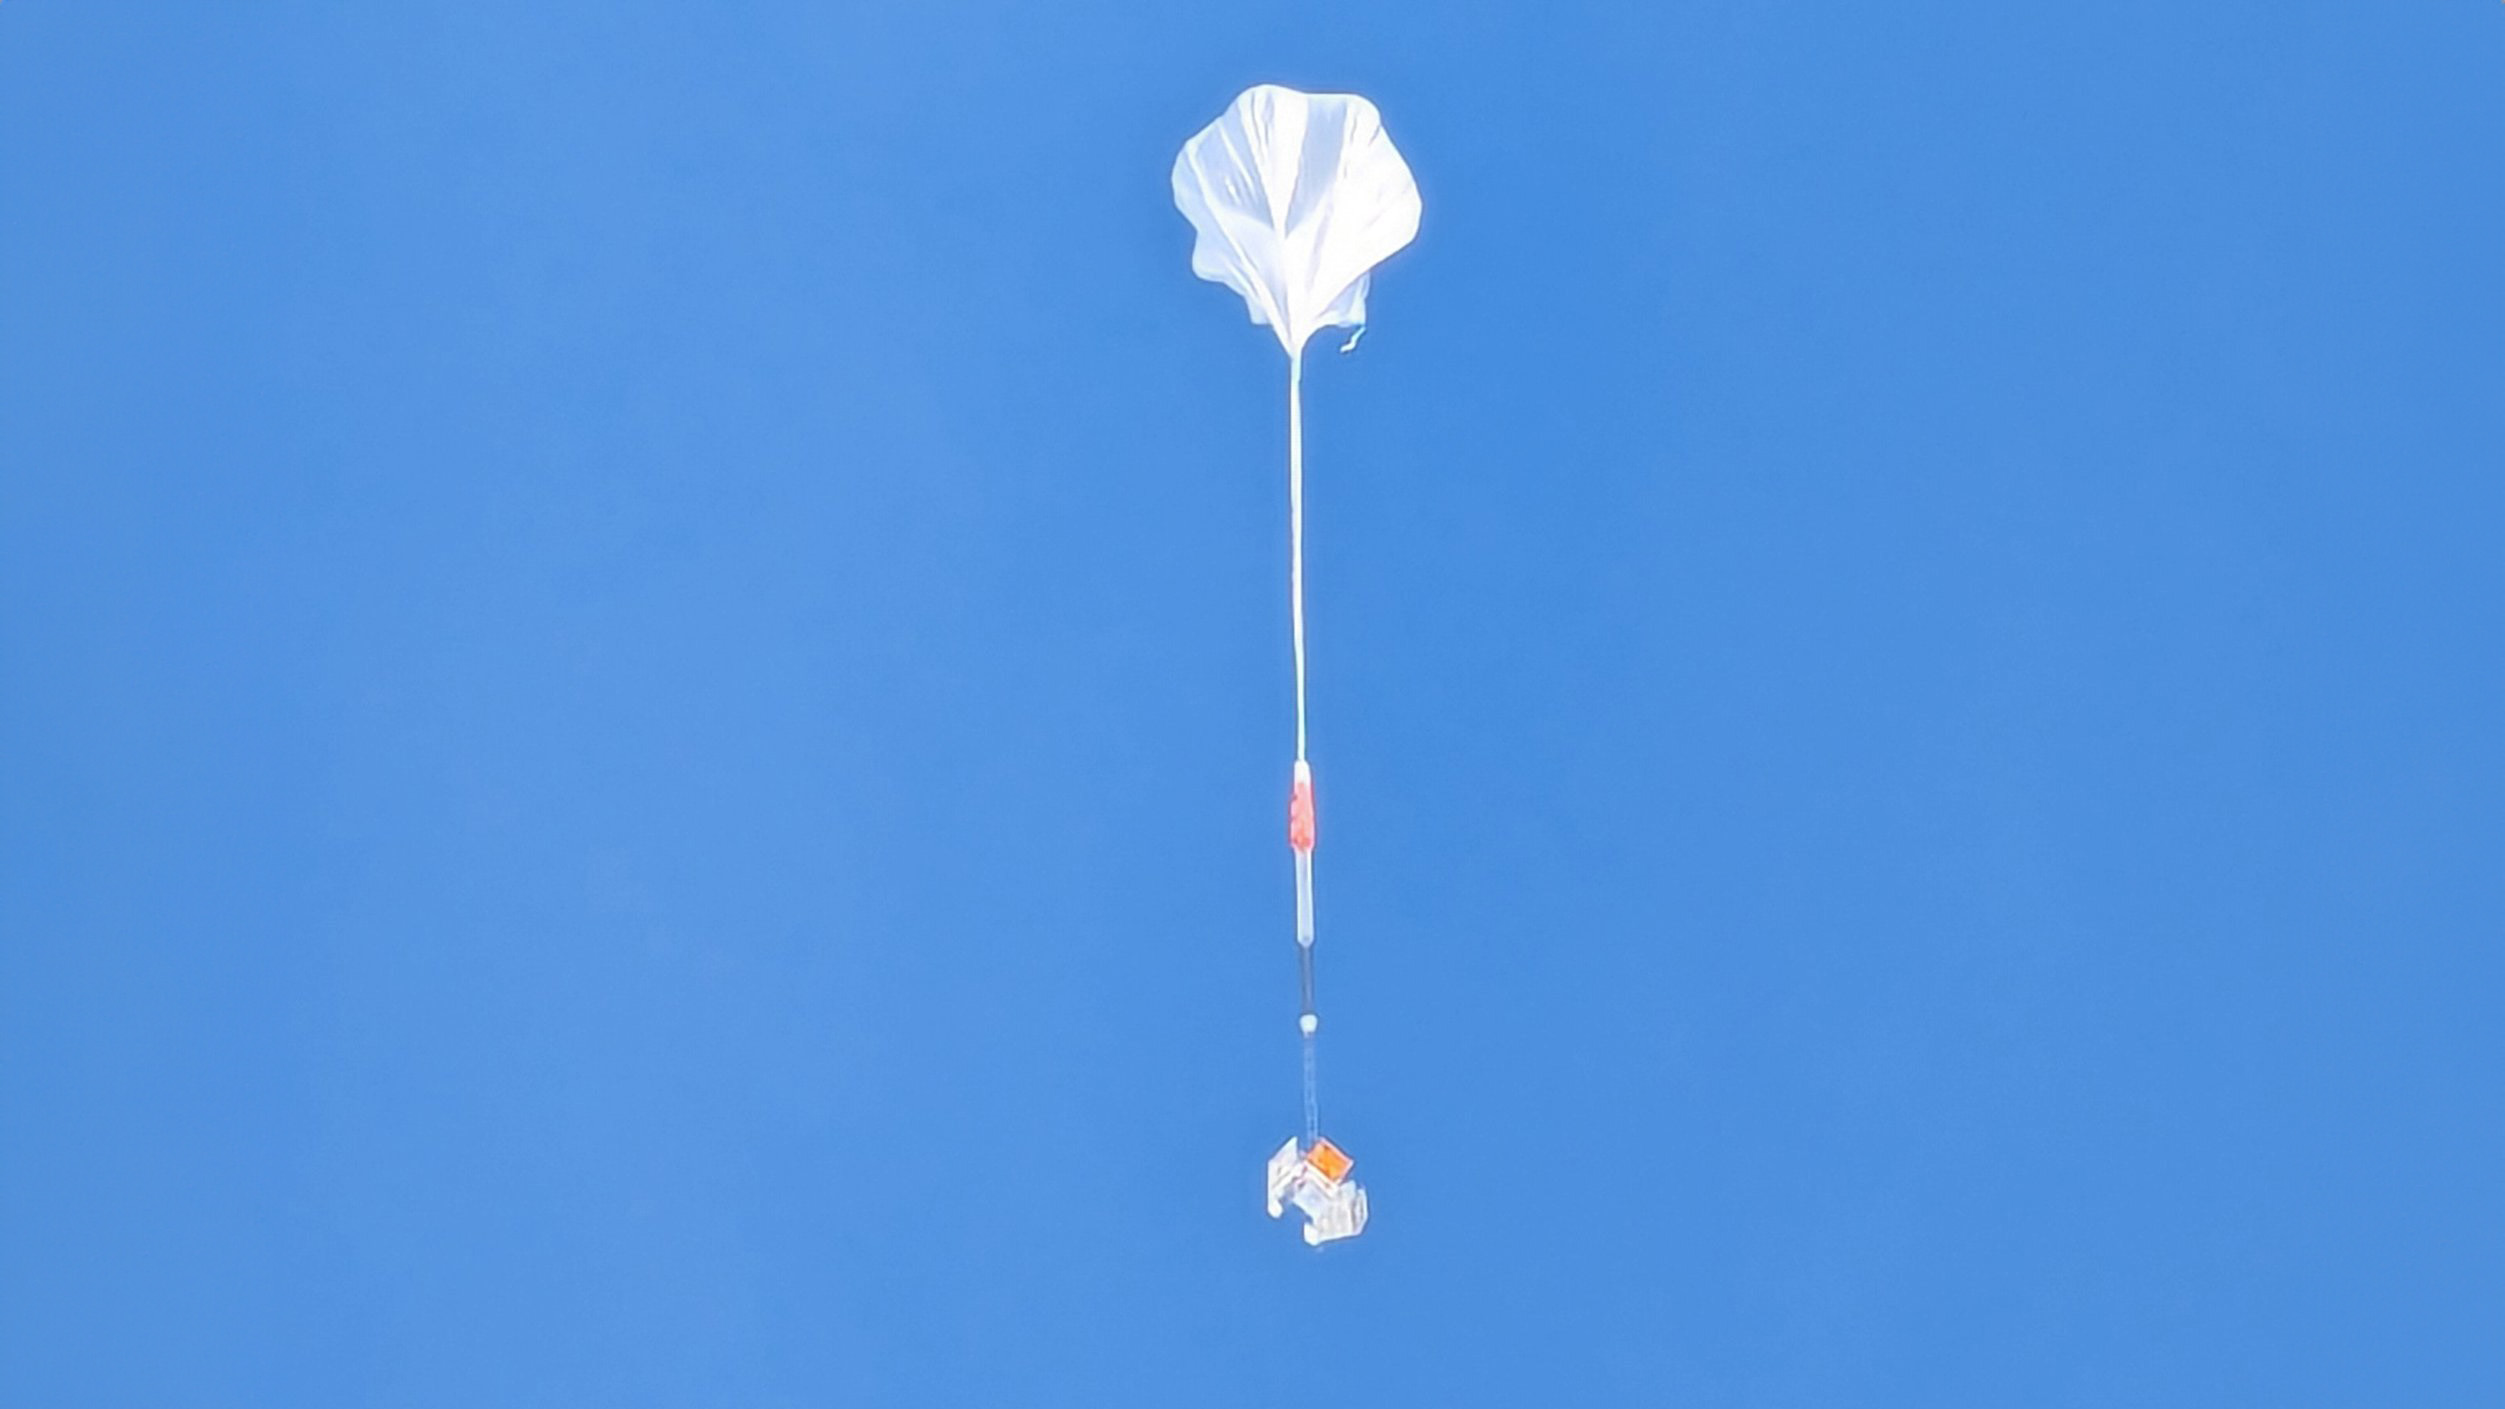 The GUSTO satellite being hoisted above Antarctica by the giant baloon.